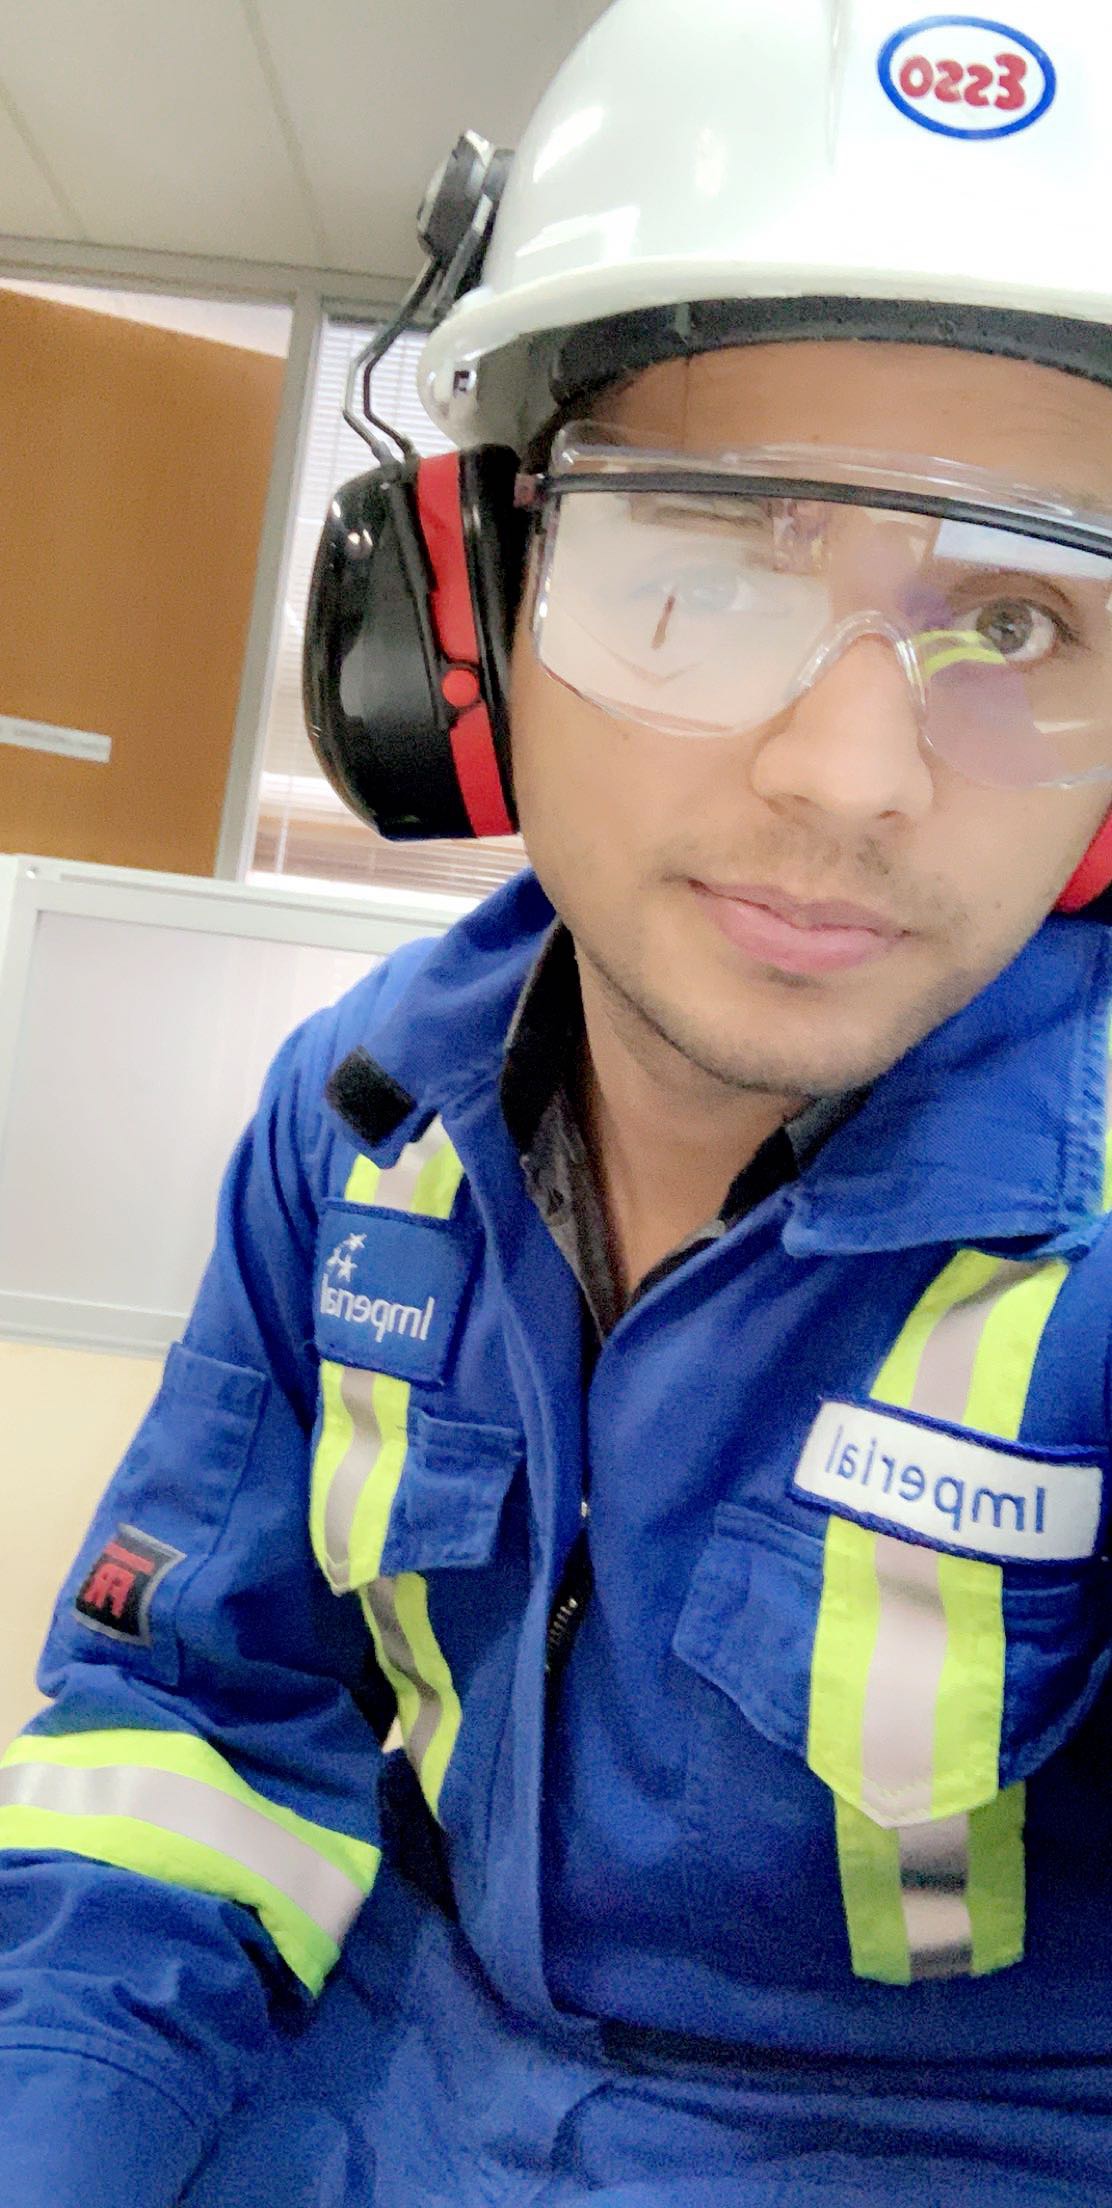 Image of Shahid in work wear